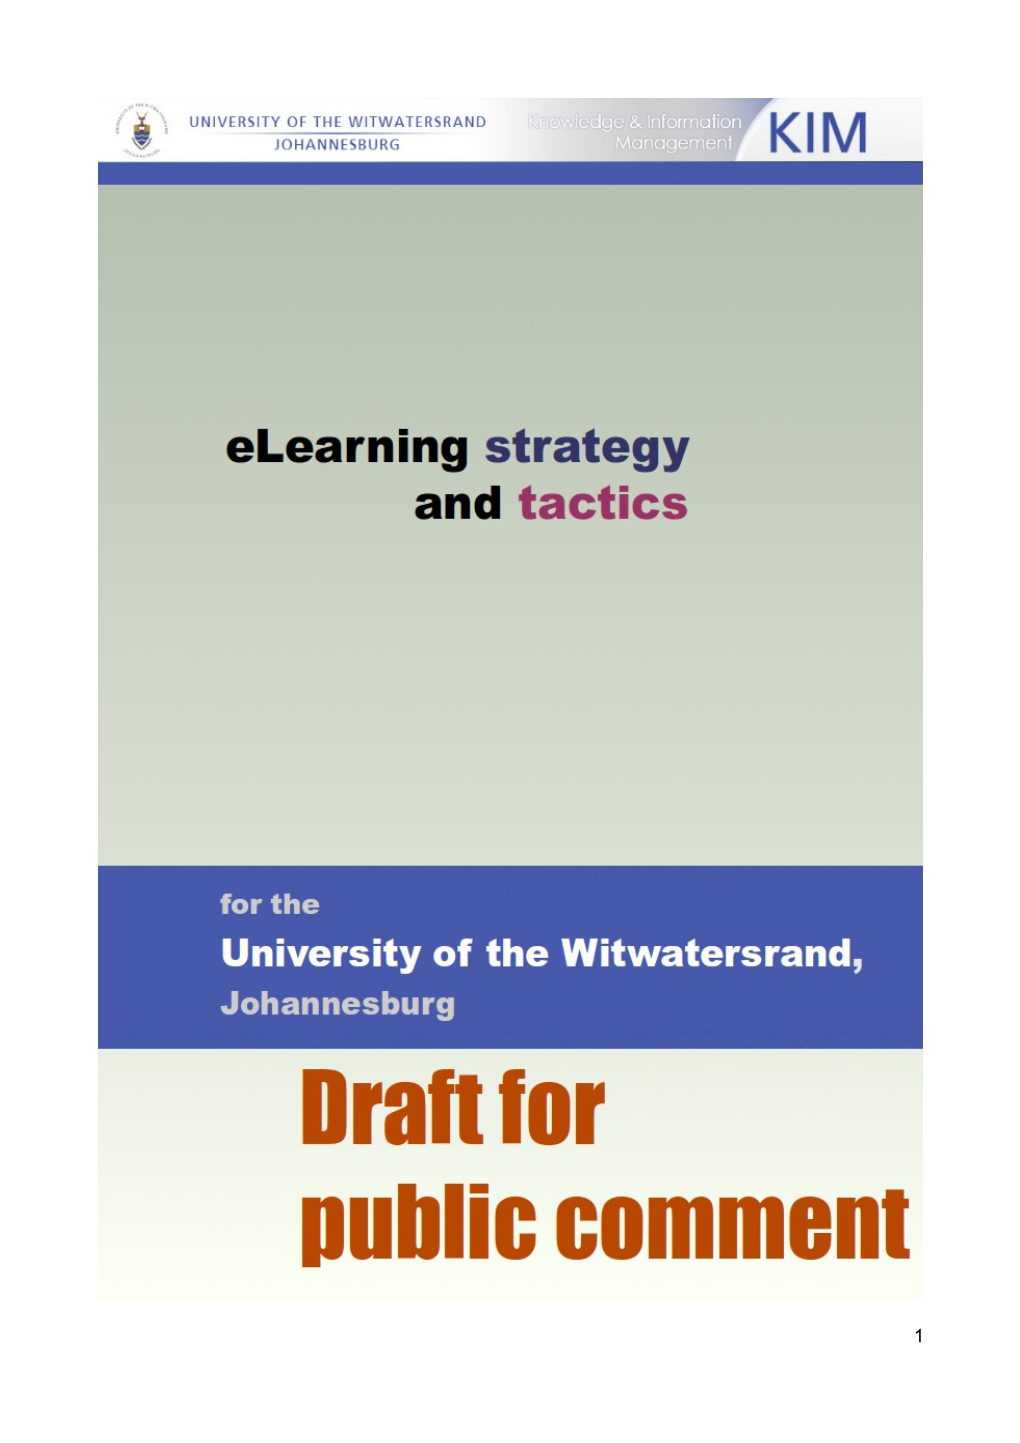 An Elearning Strategy for the University of the Witwatersrand, Johannesburg